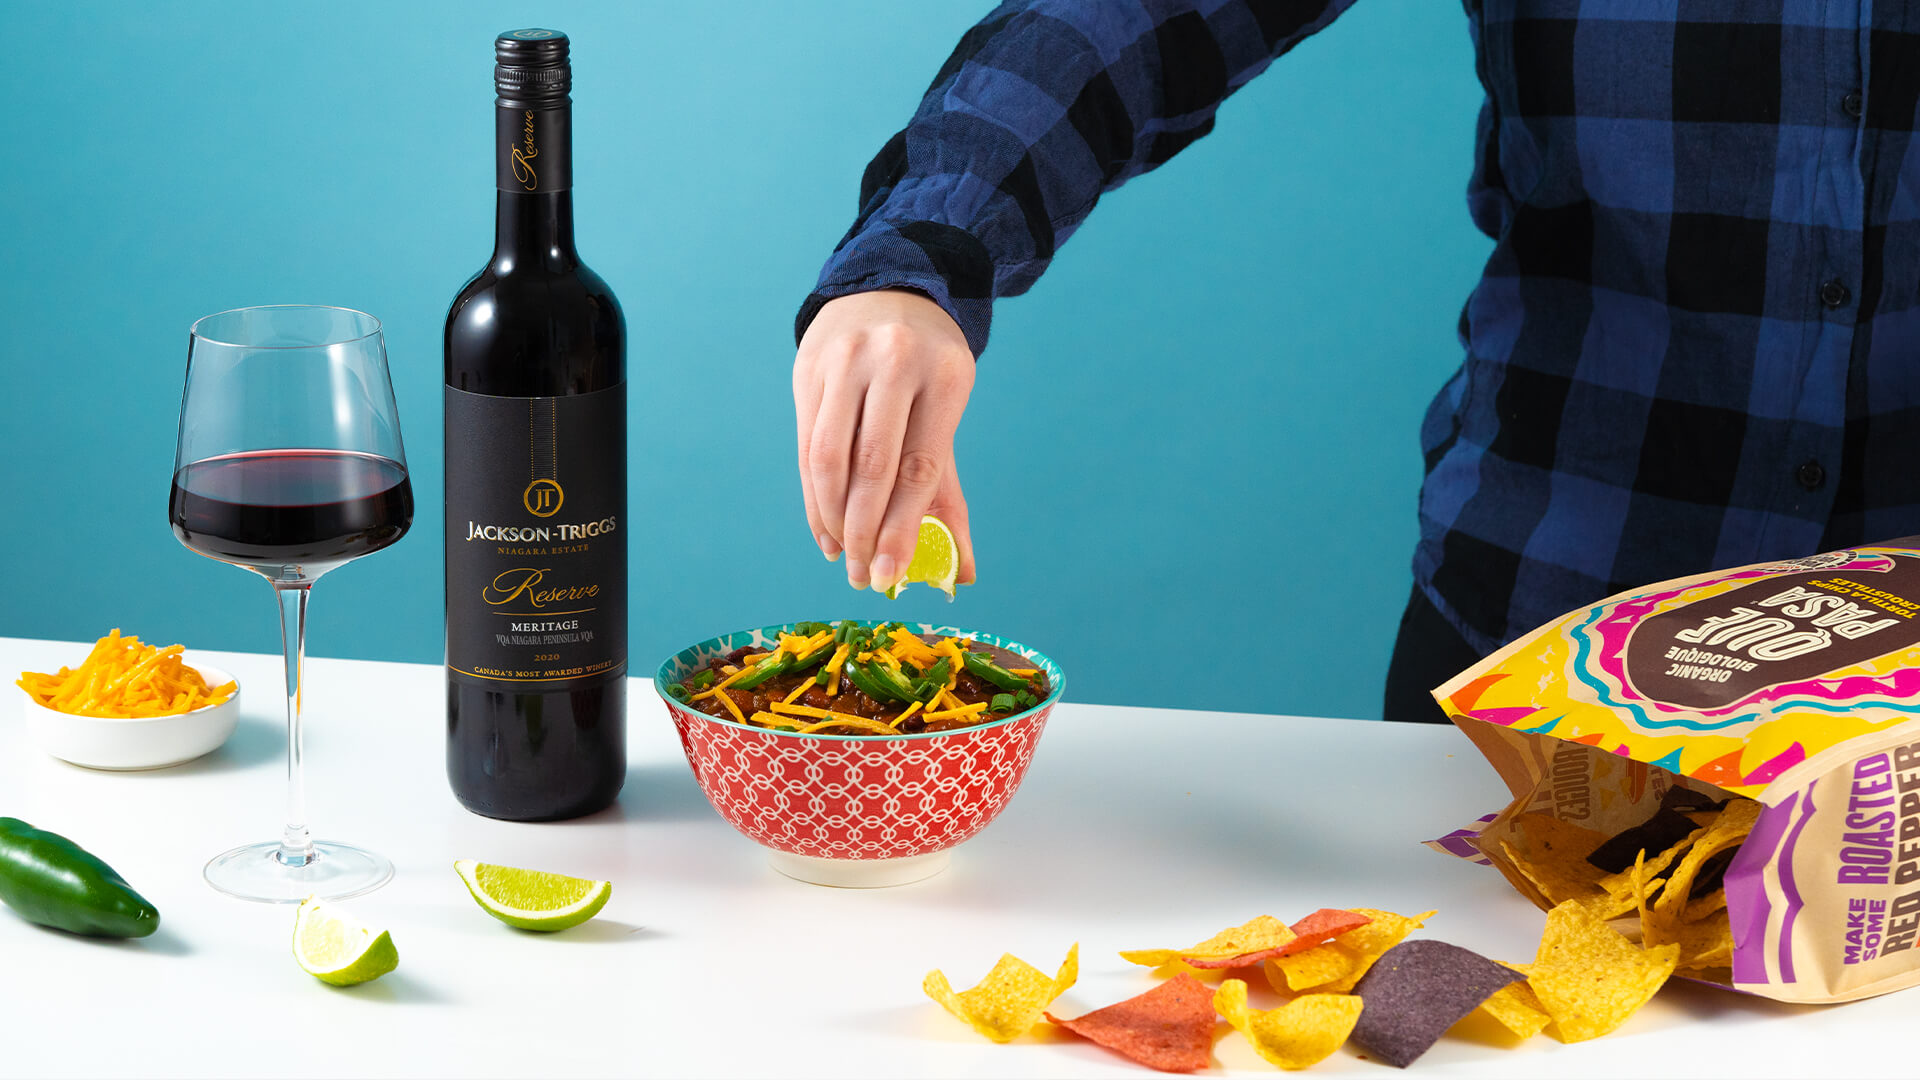 A bottle of Jackson-Triggs Reserve Meritage being served with chili.